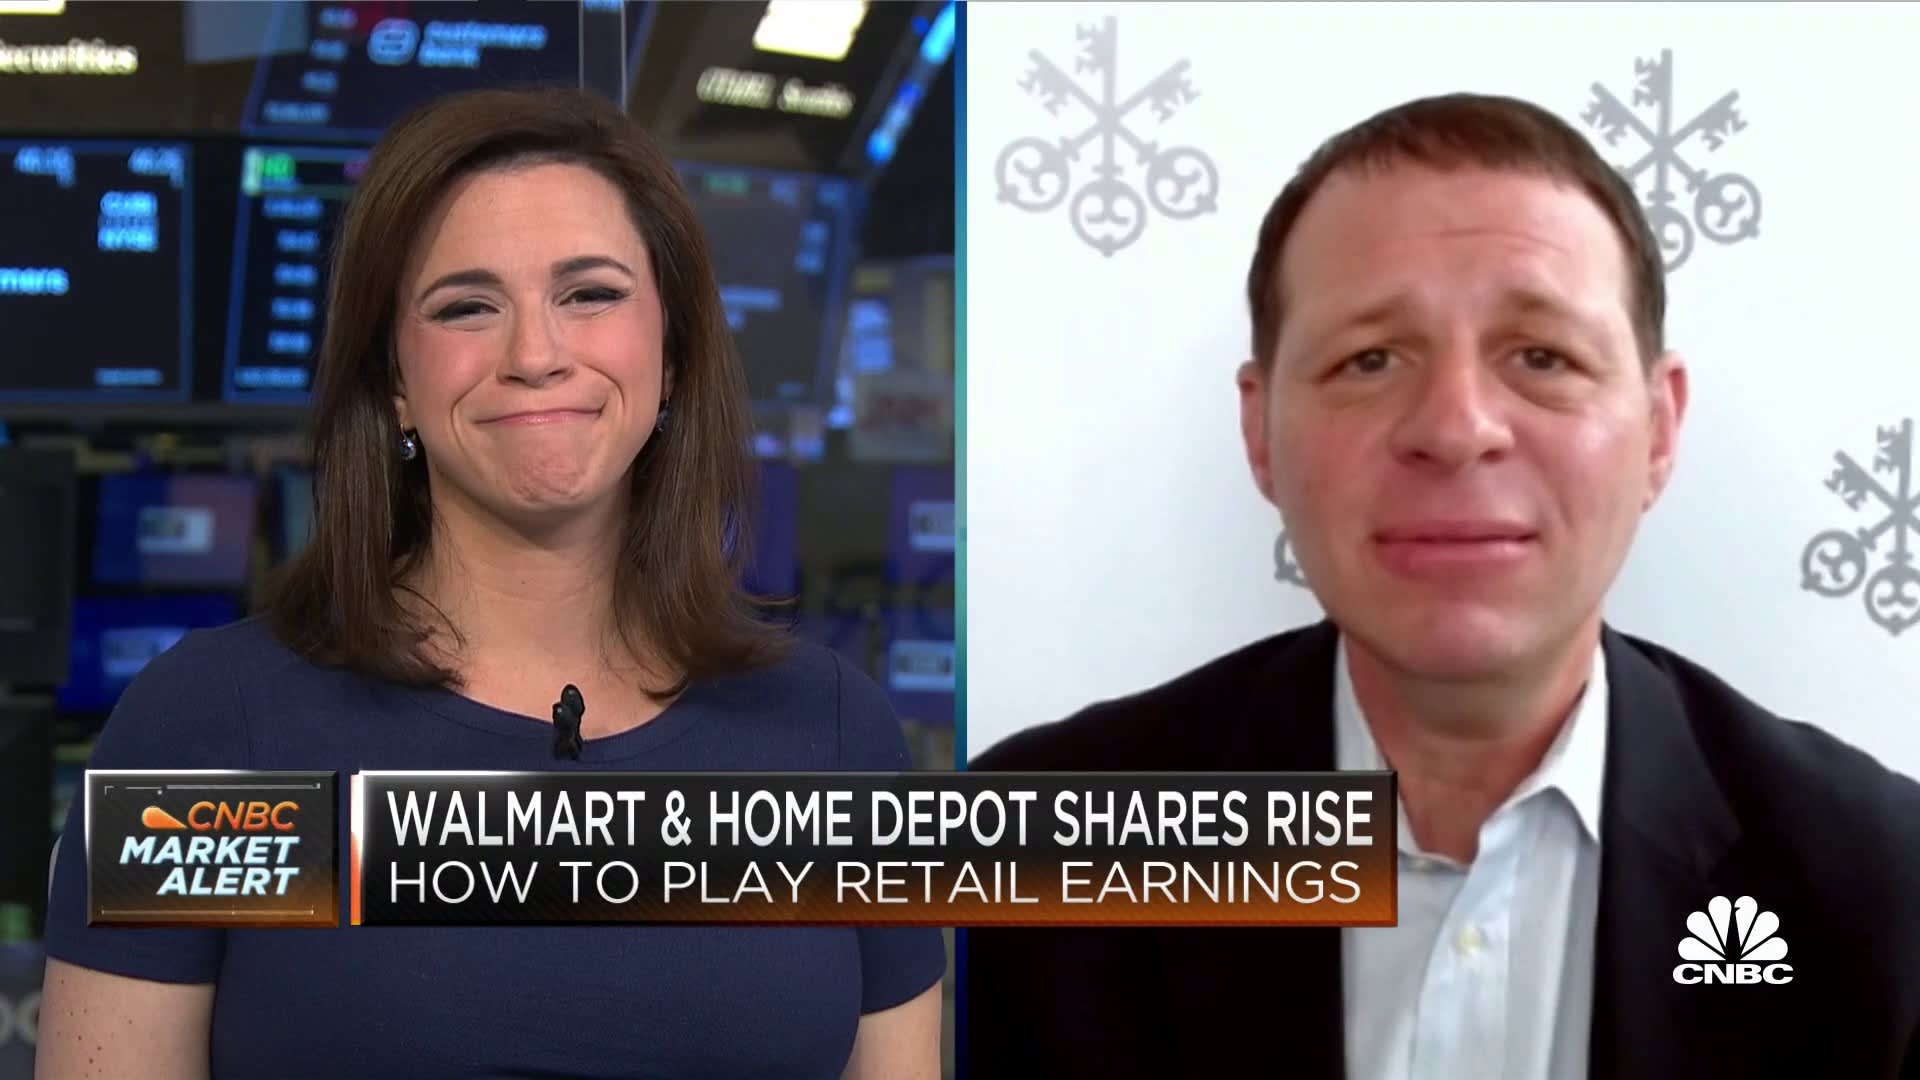 You can make money on Walmart and Home Depot over the next 12 months, says UBS's Michael Lasser